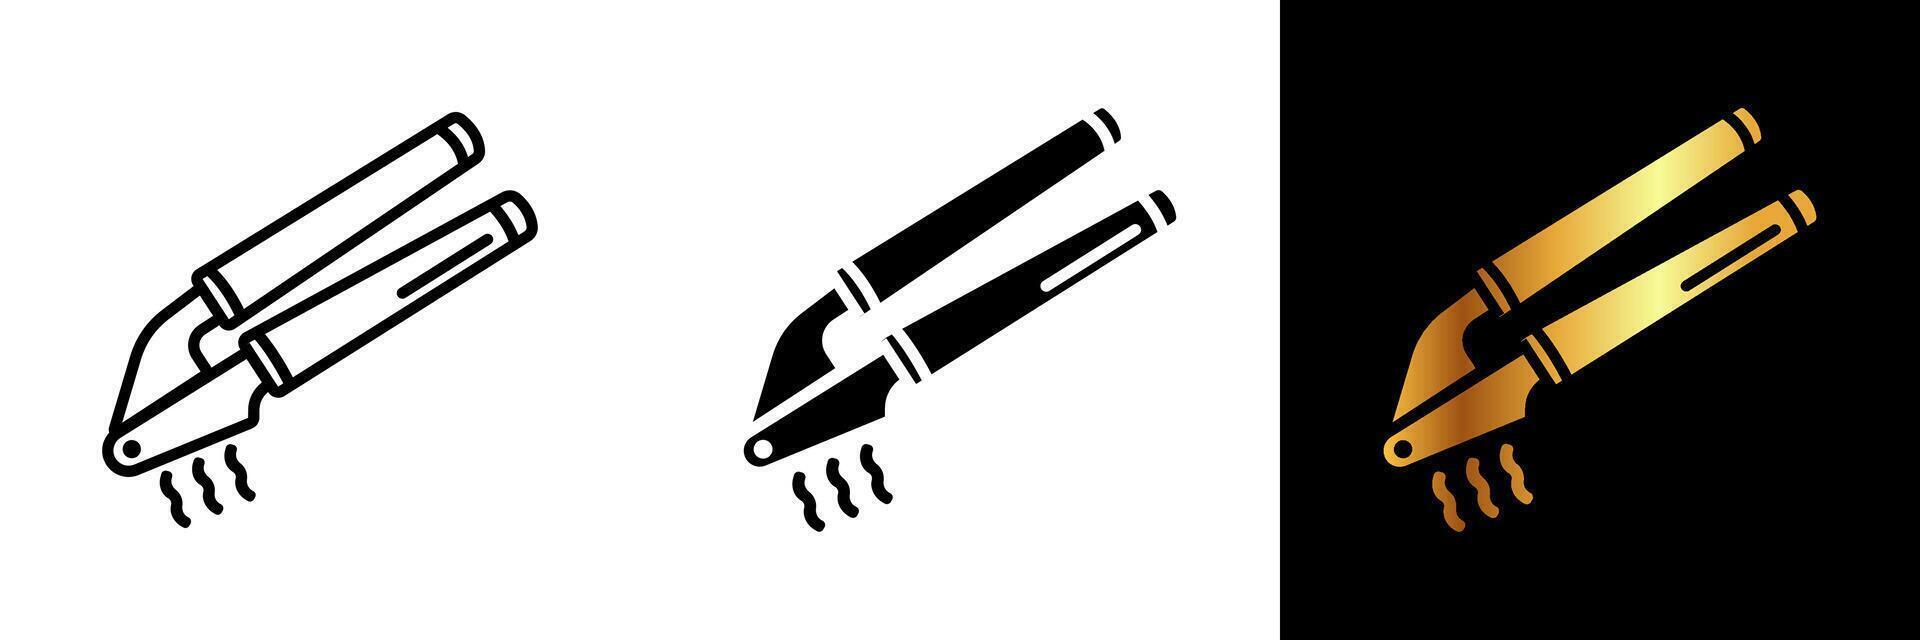 A handy and efficient icon representing a garlic press, embodying kitchen convenience, culinary efficiency, and effortless garlic preparation for flavor-packed dishes. vector